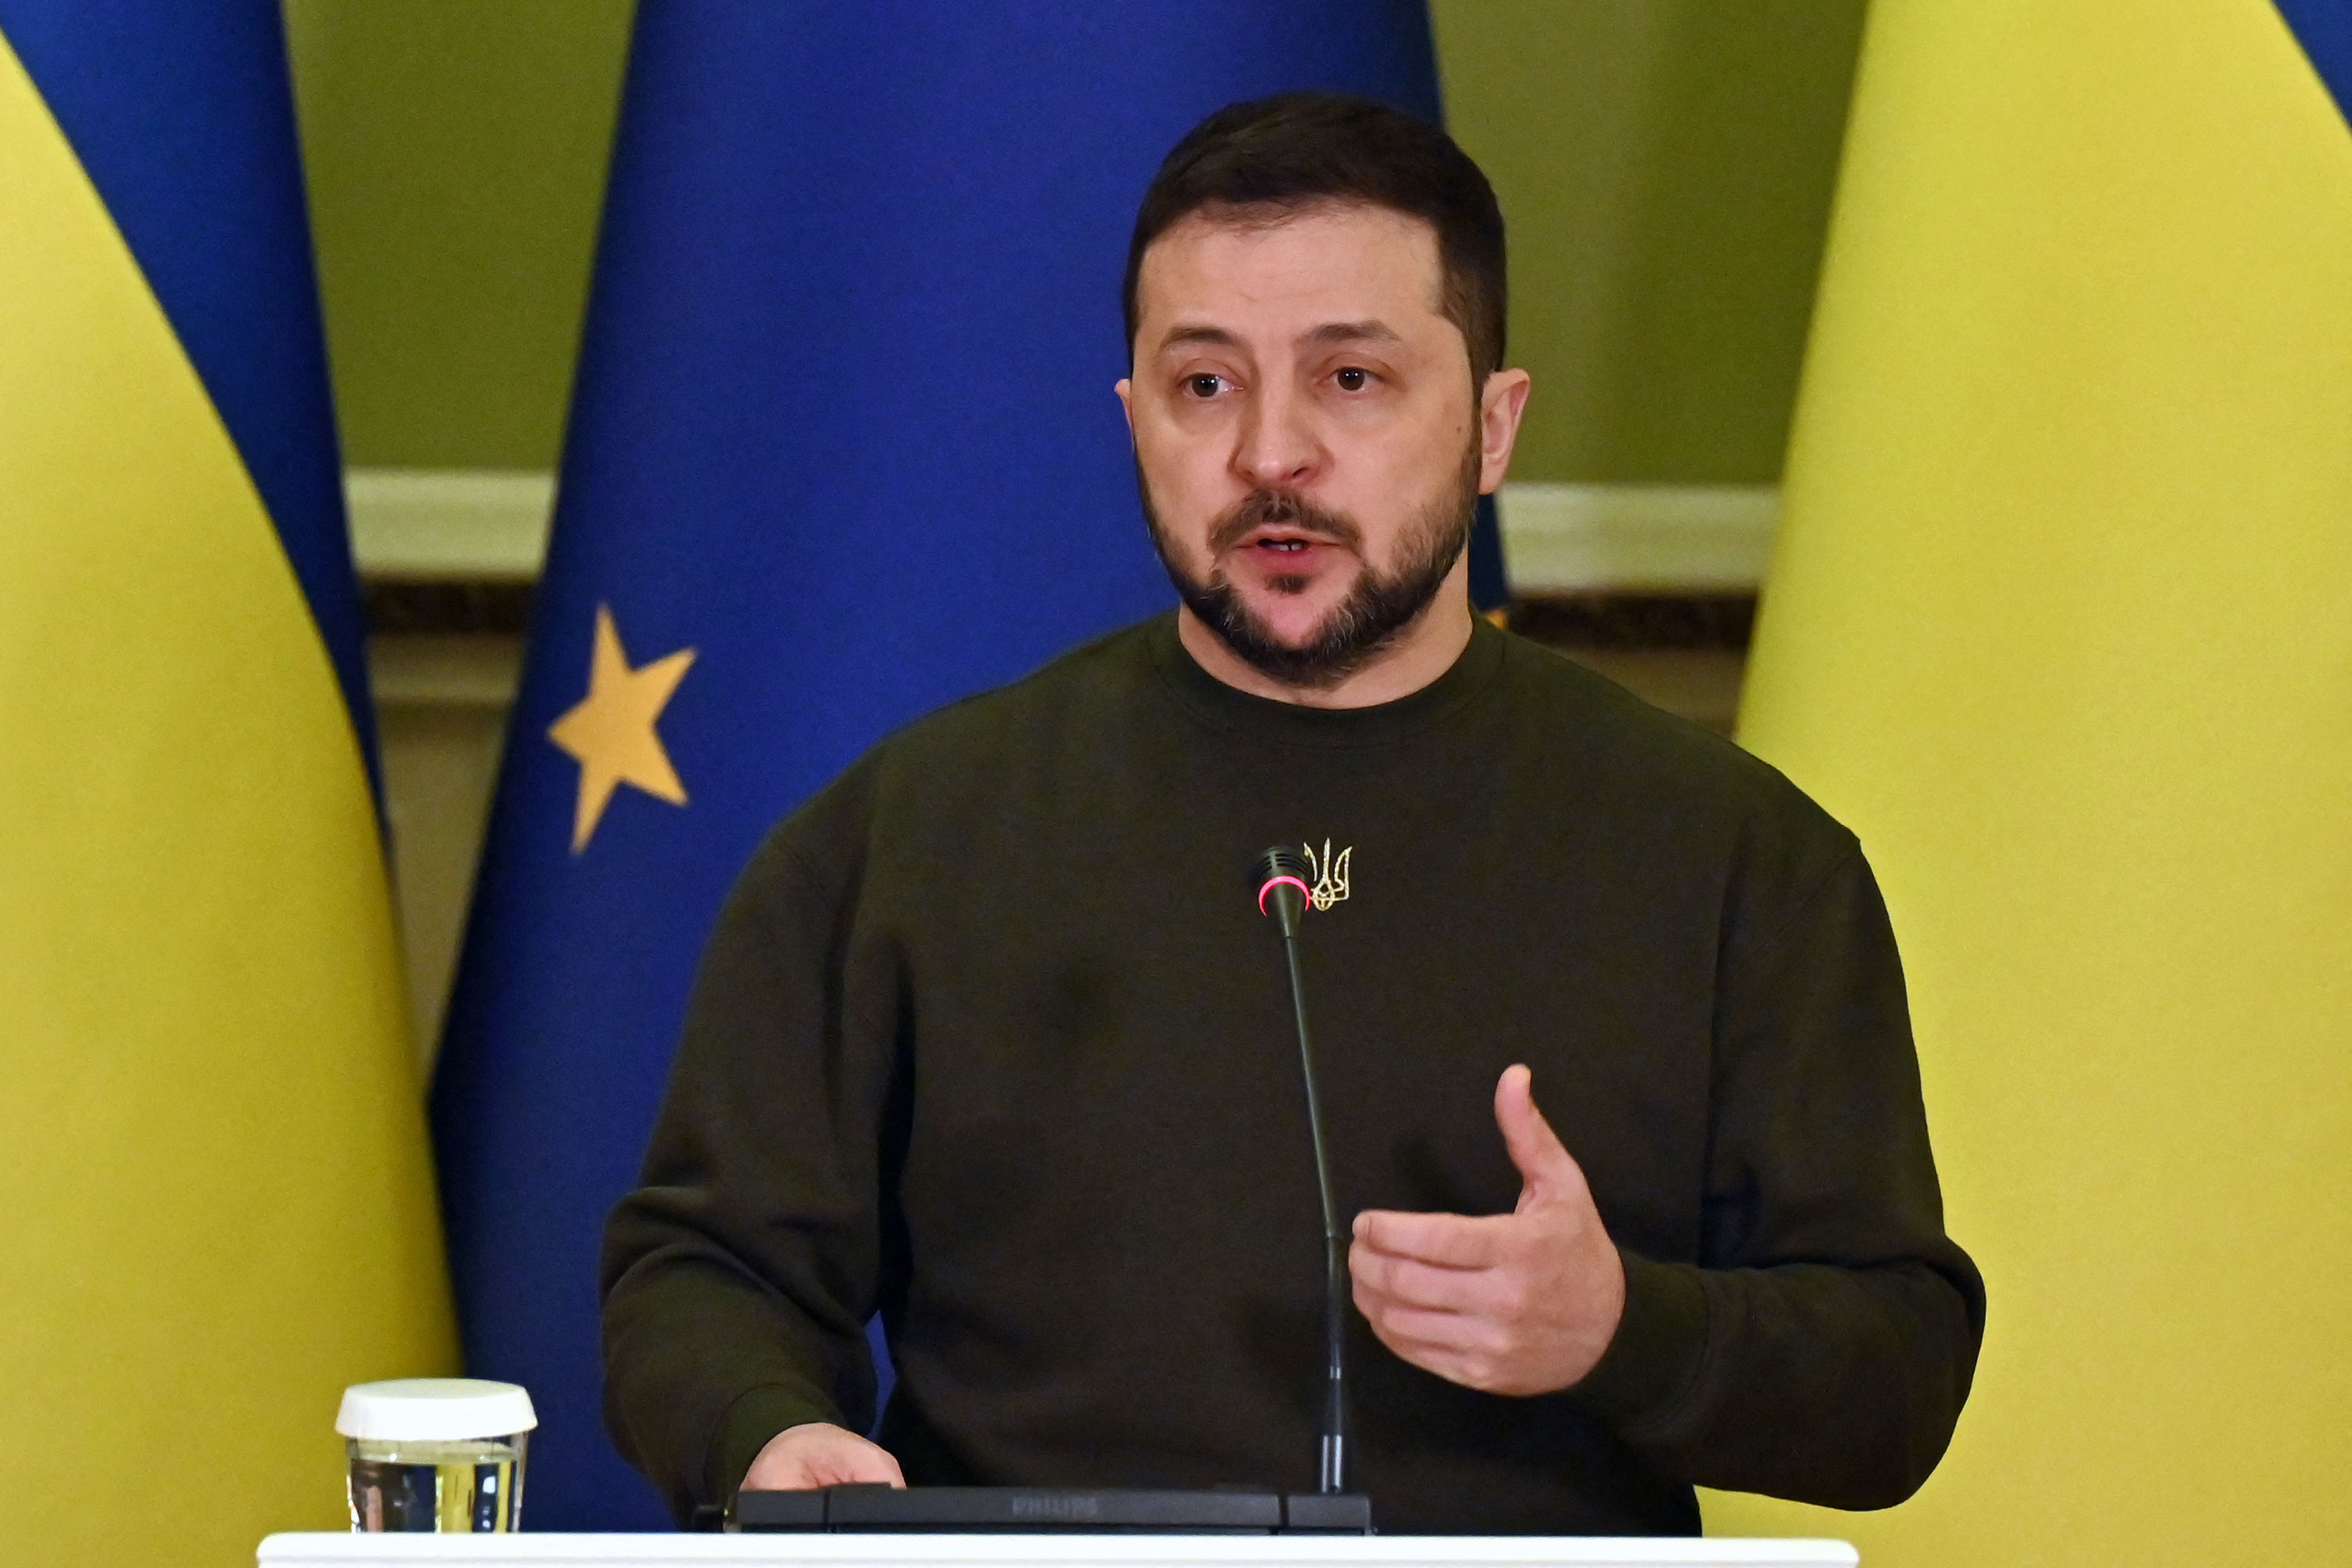 Ukrainian President Volodymyr Zelensky speaks during a joint press conference with President of the European Commission during her visit in Kyiv on February 2.